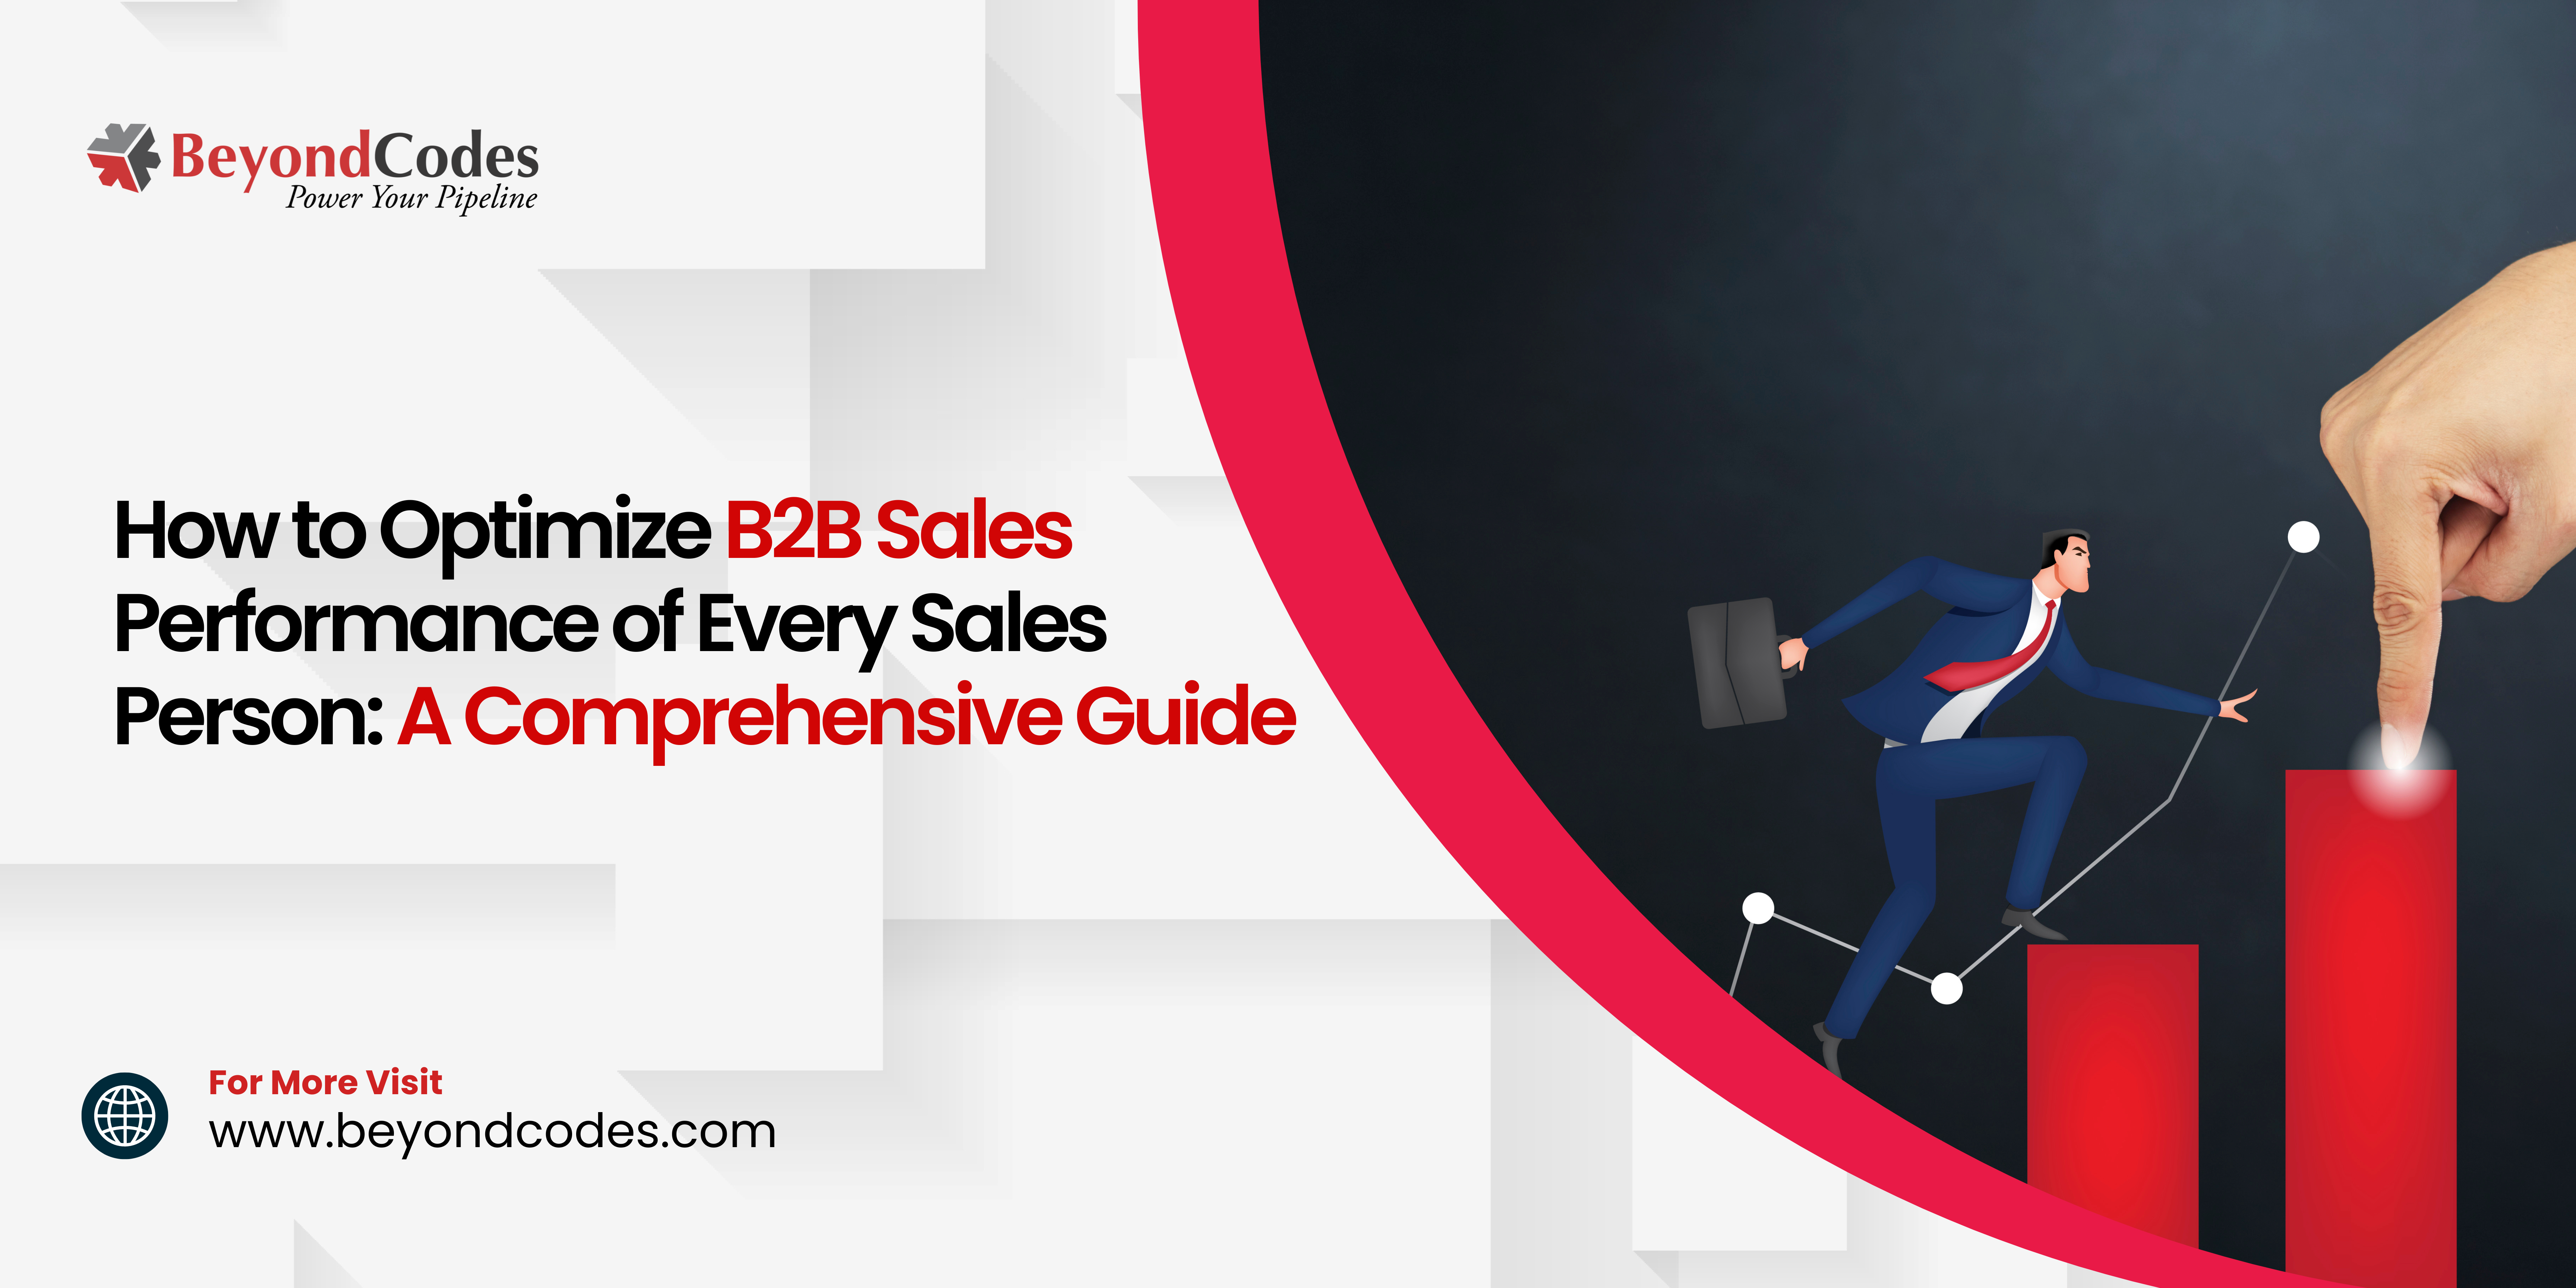 How to Optimize B2B Sales Performance of Every Sales Person